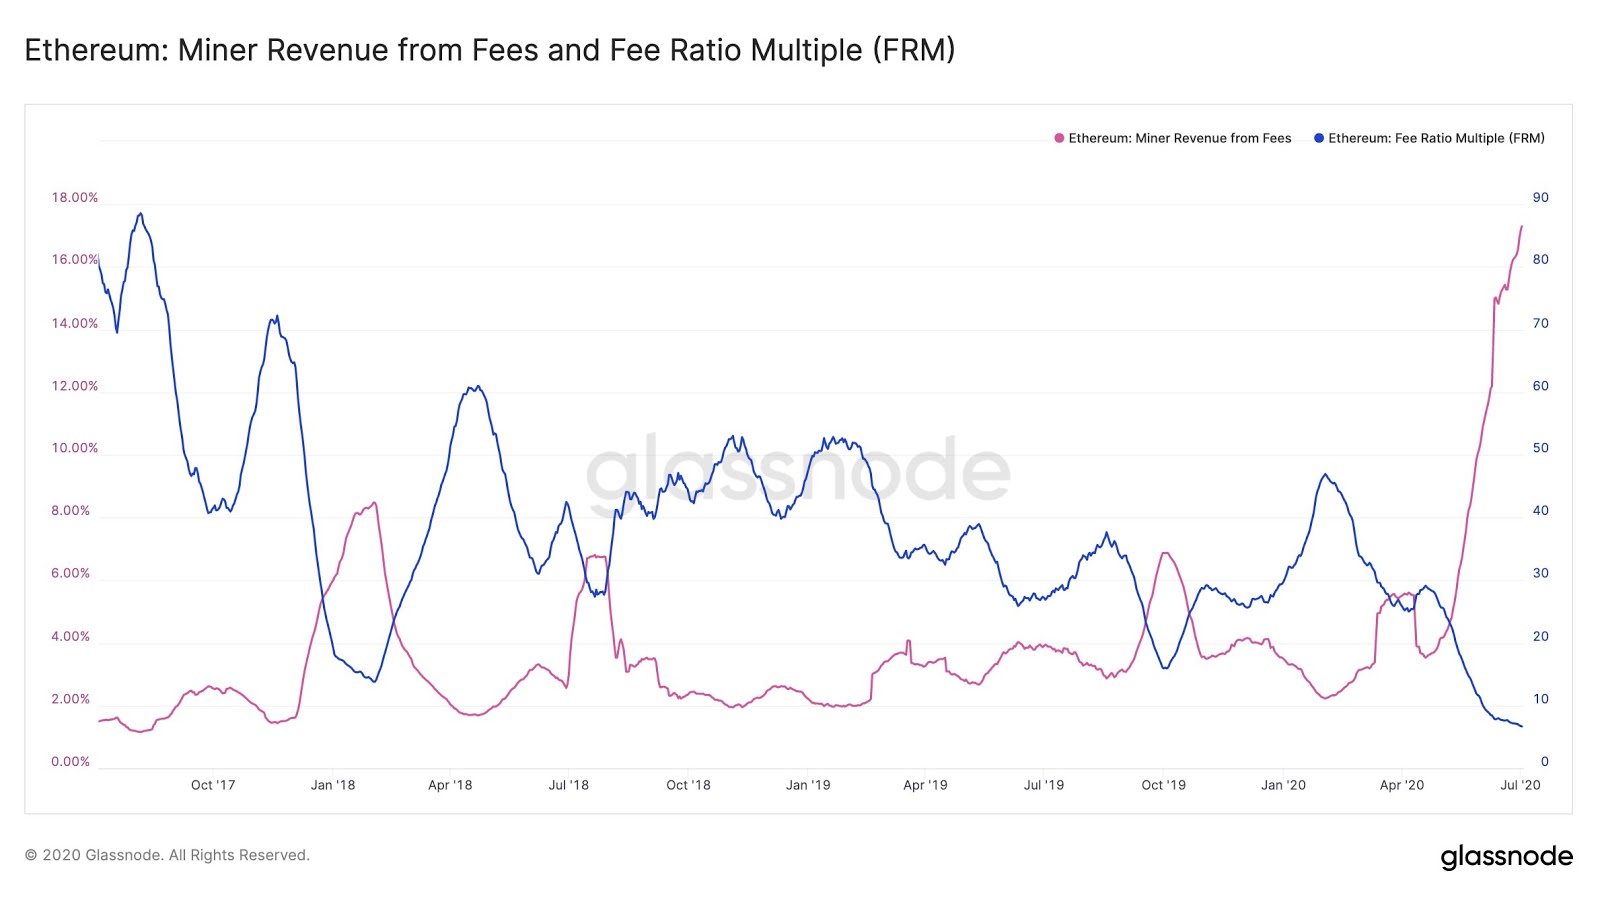 Miner revenue from fees and fee ratio multiple